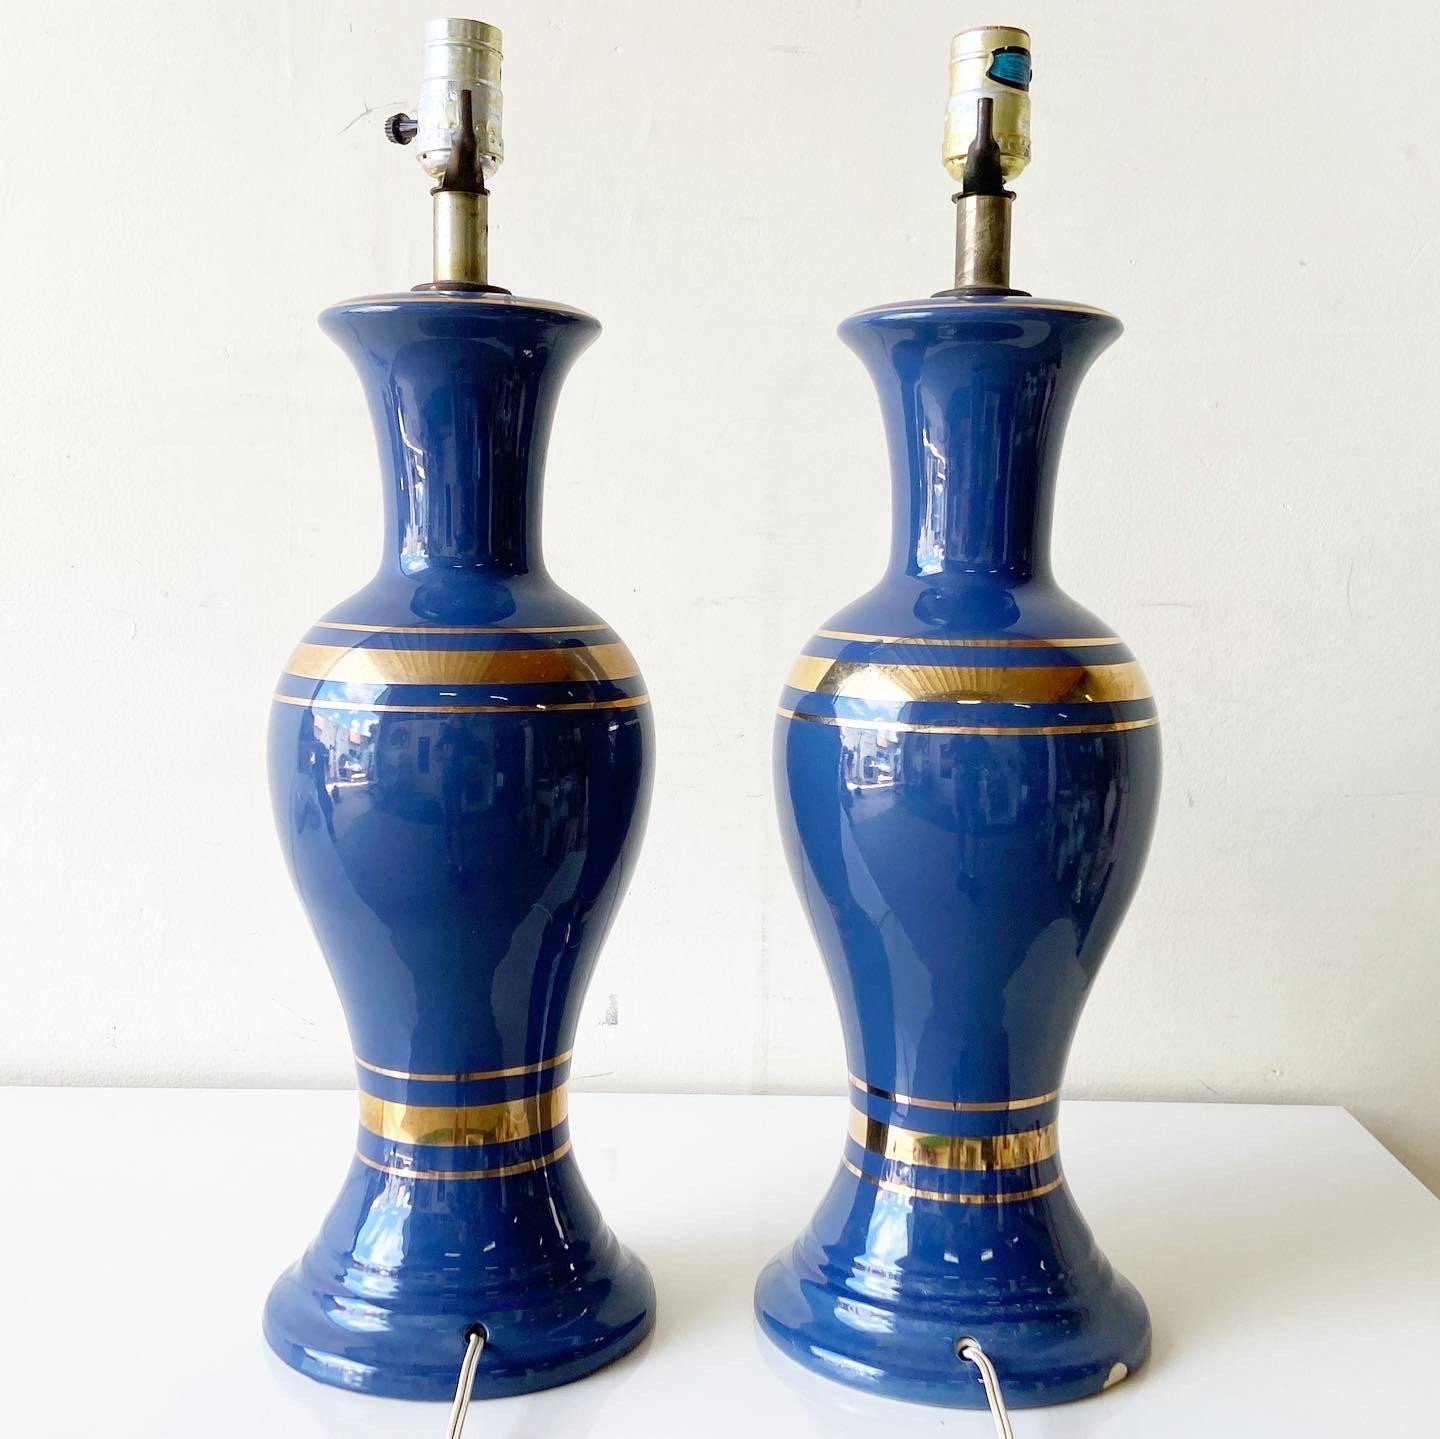 Post-Modern Mid Century Modern Blue and Gold Porcelain Table Lamps – a Pair For Sale